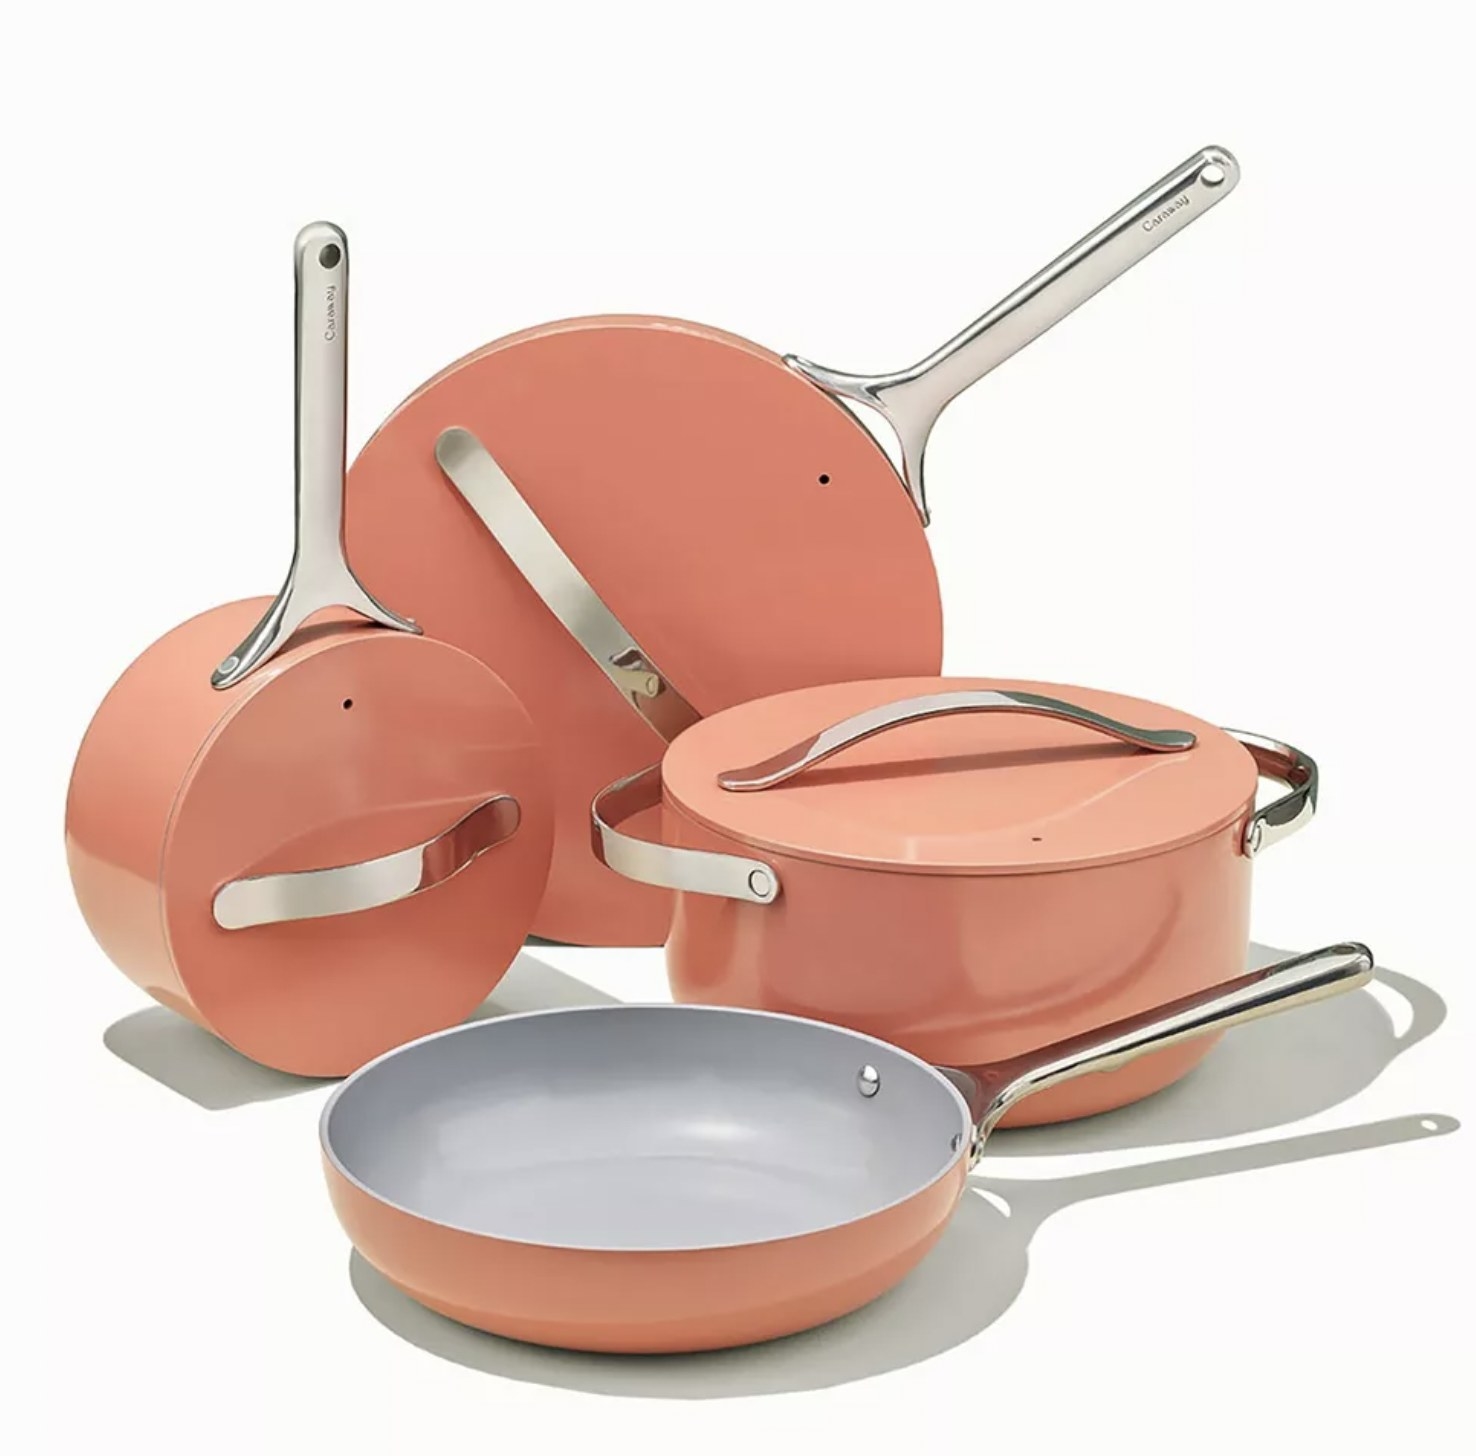 The pink cookware set